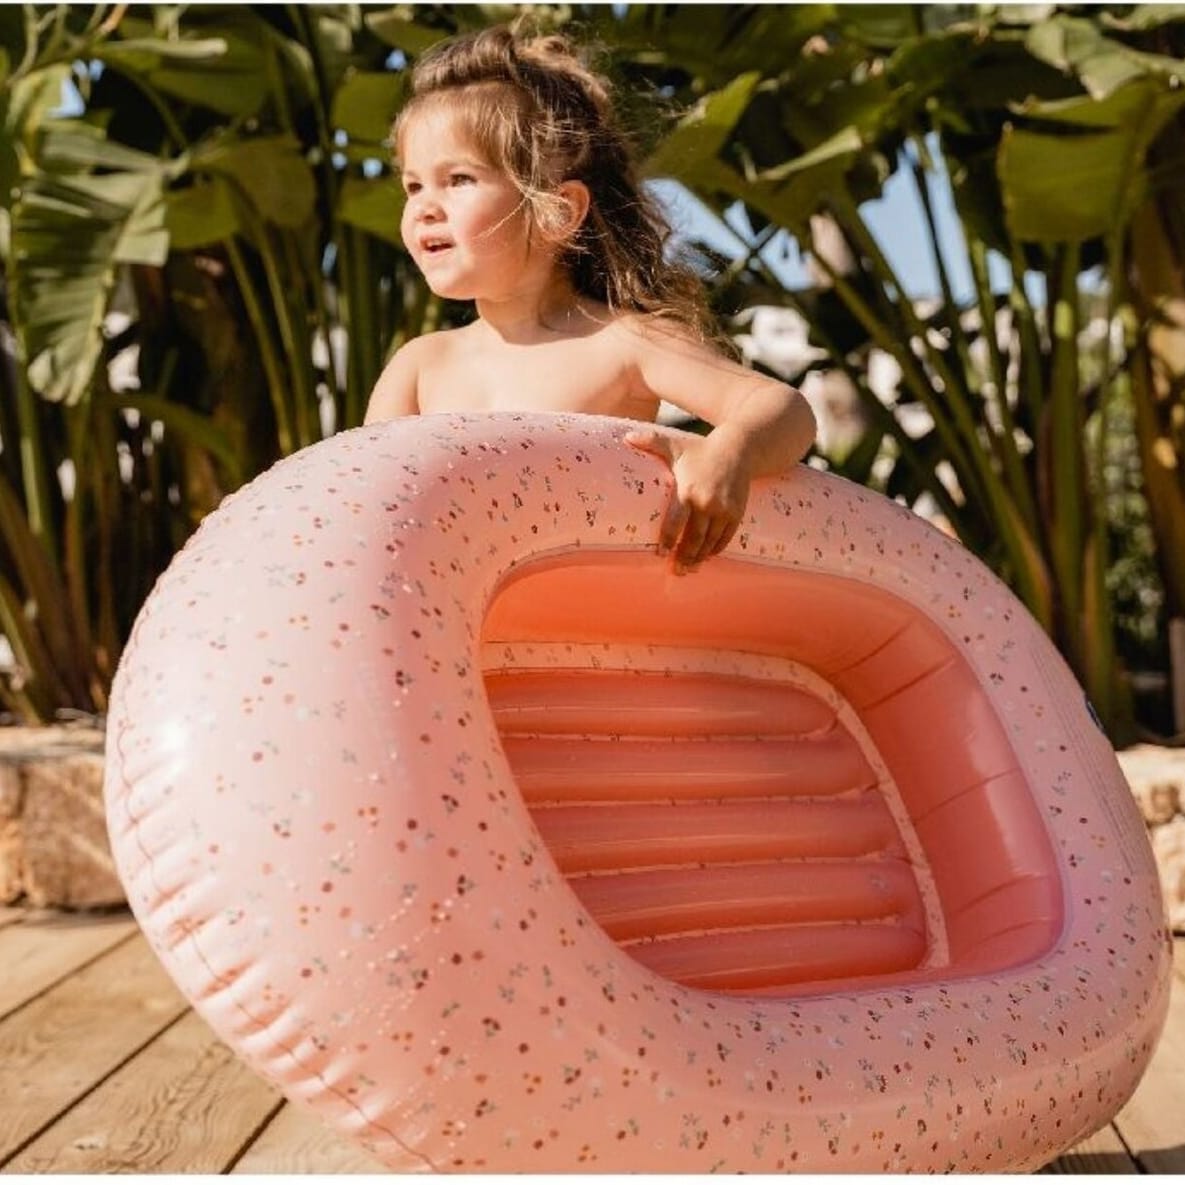 Inflatable Boat Little Pink Flowers 100 x 67 cm